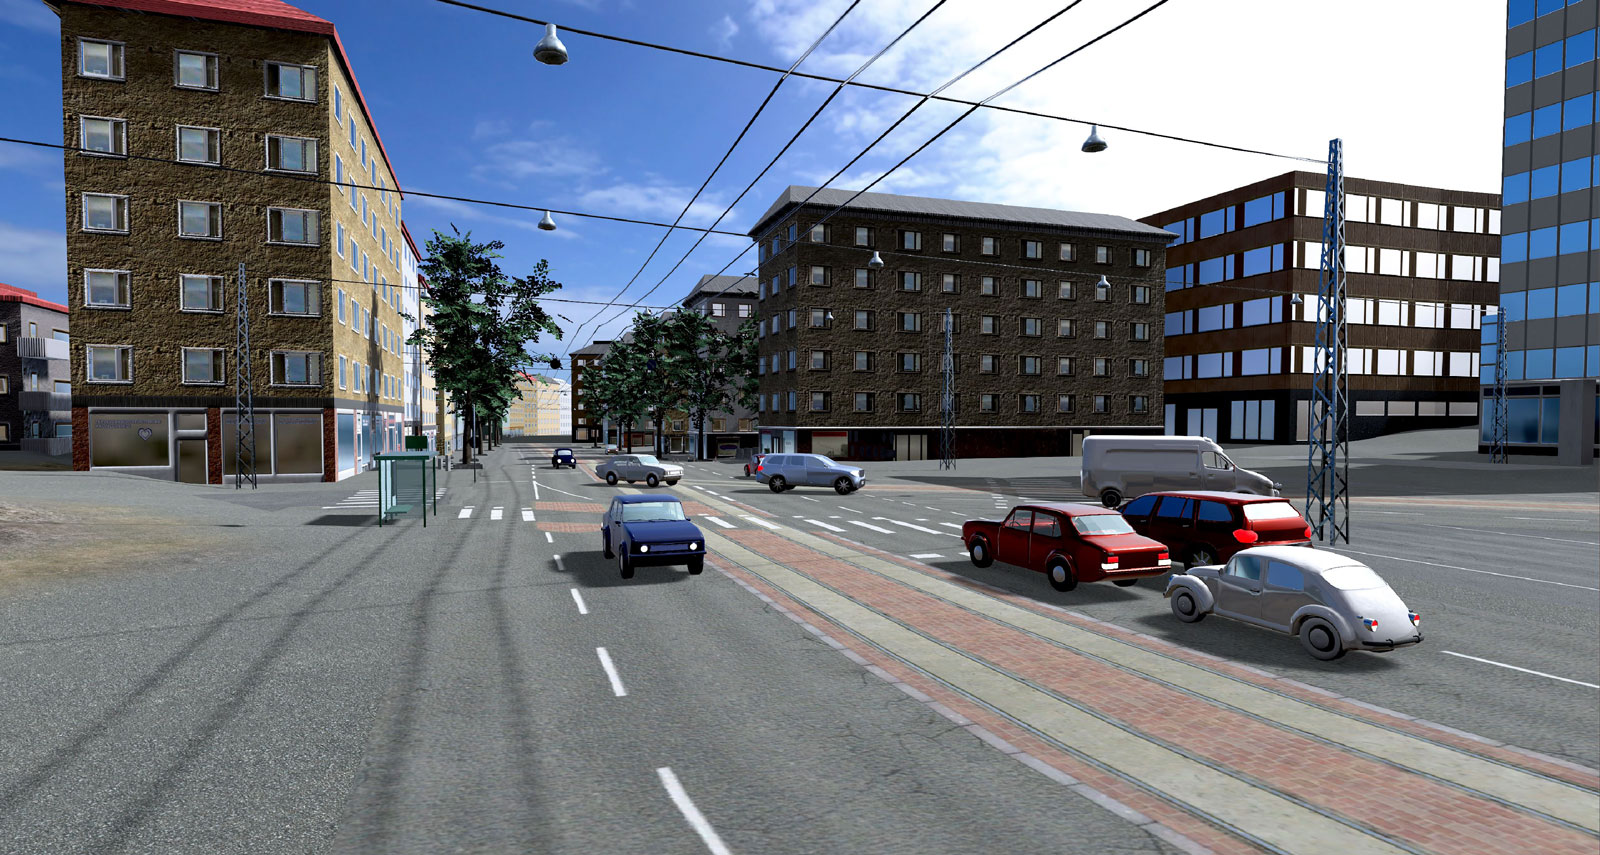 Helsinki simulated in a VR environment for VR Ambulance Simulator.